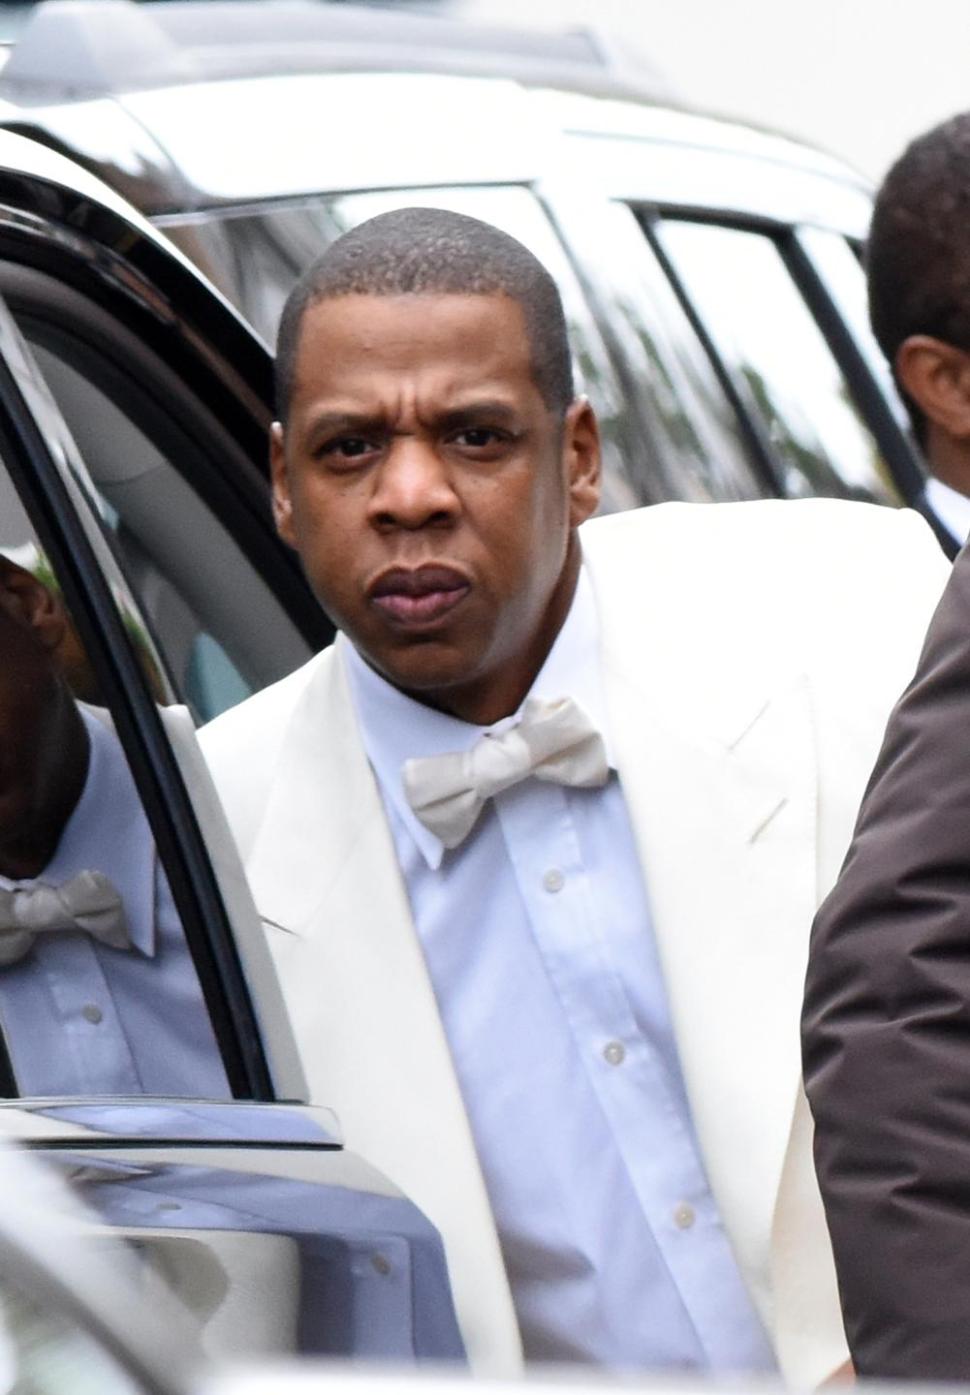 Jay Z arrives for his sister-in-law’s wedding looking suave in his white tuxedo.